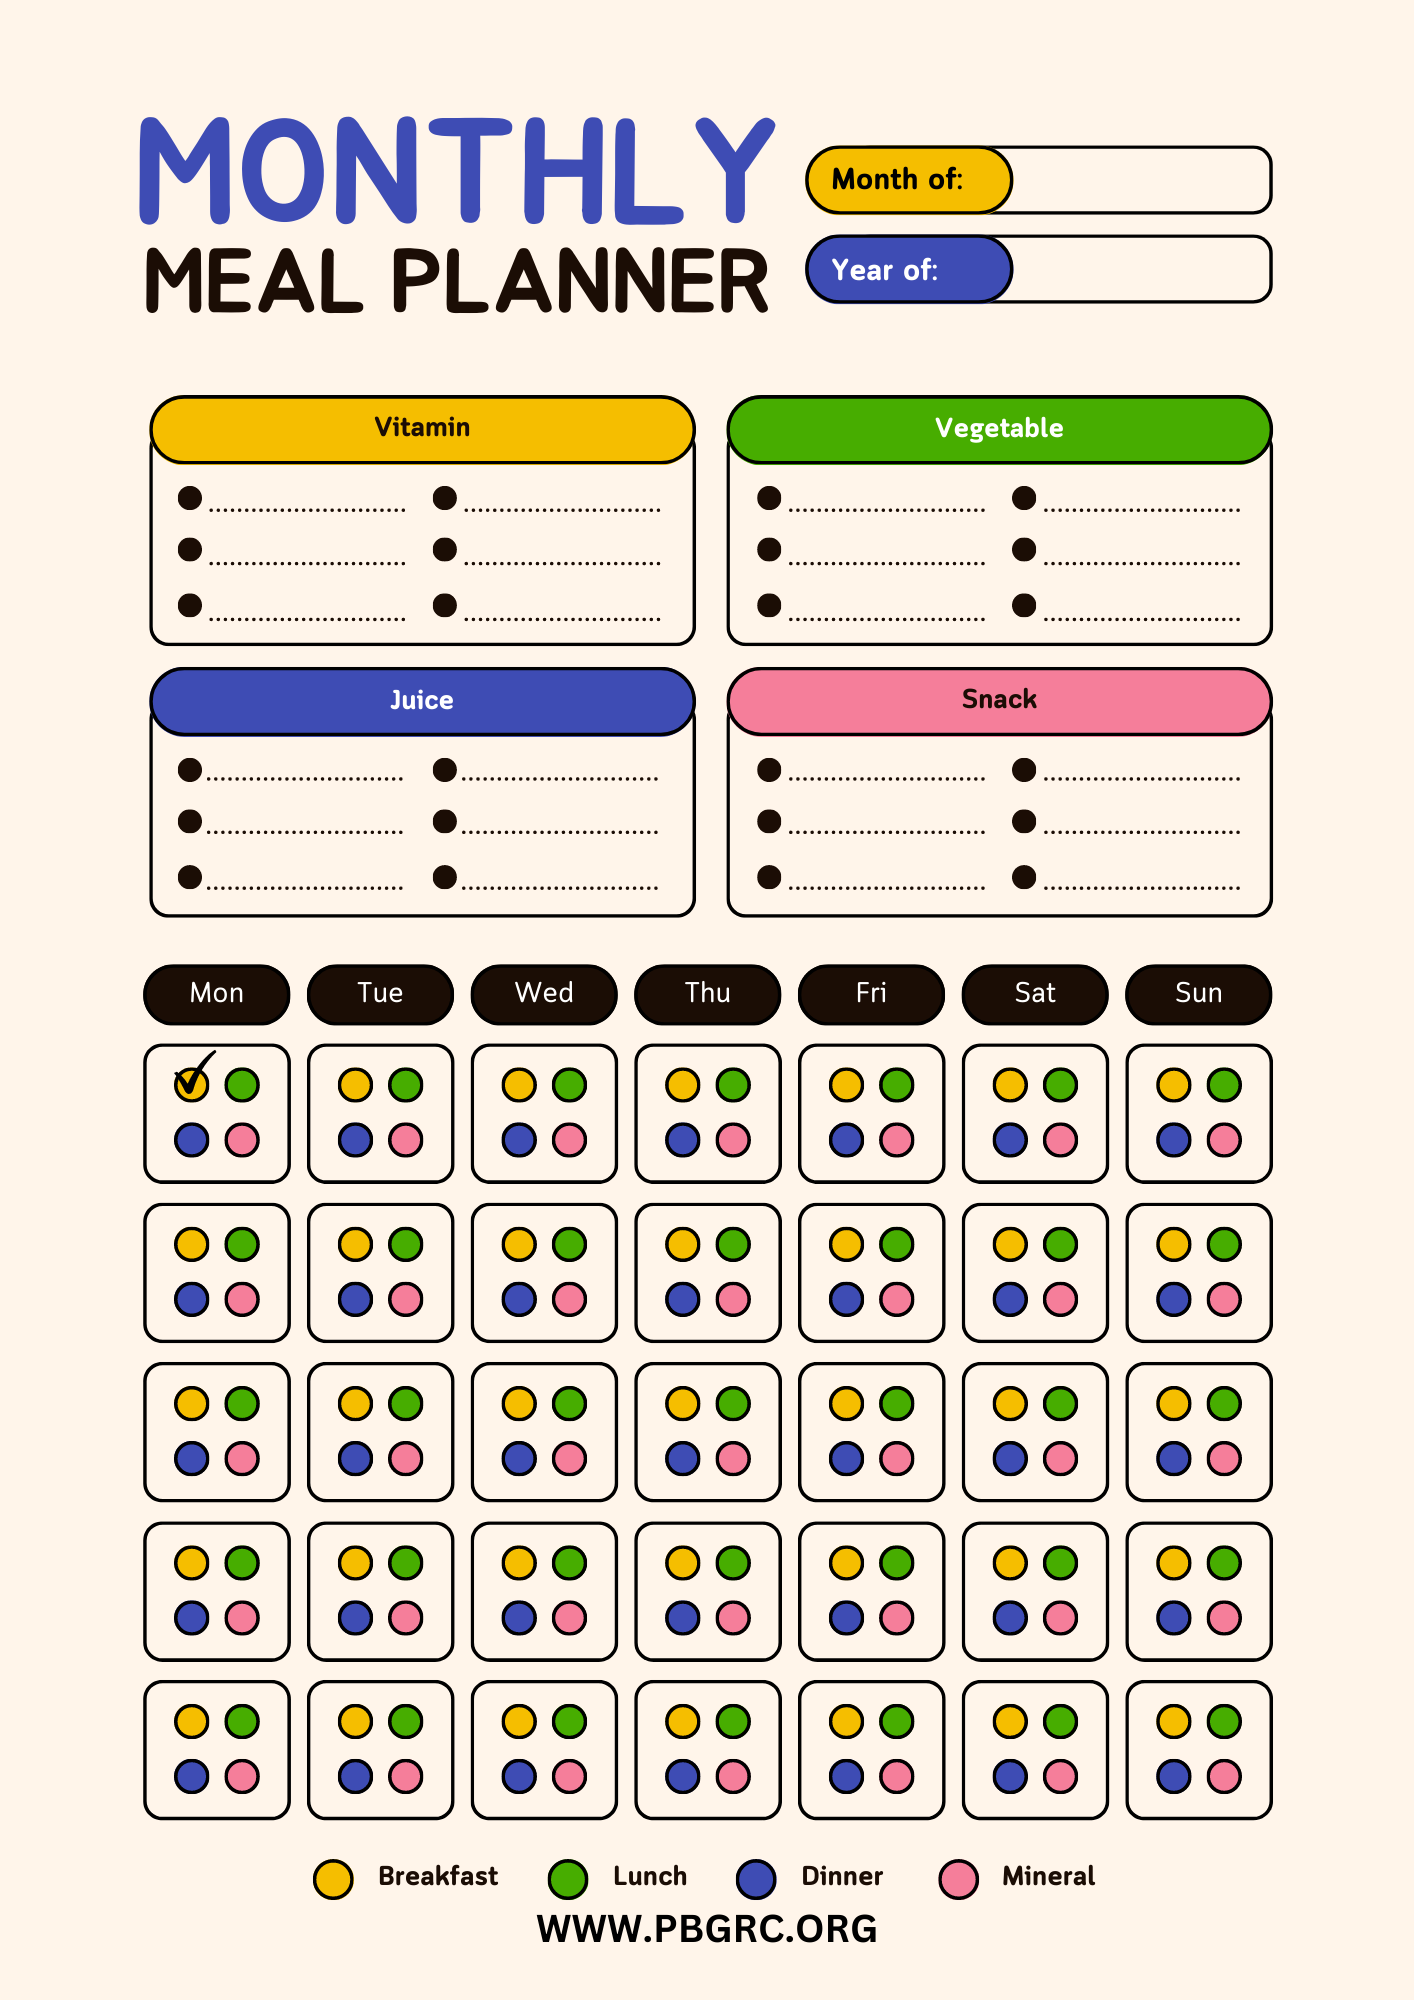 Free Meal Planner Template